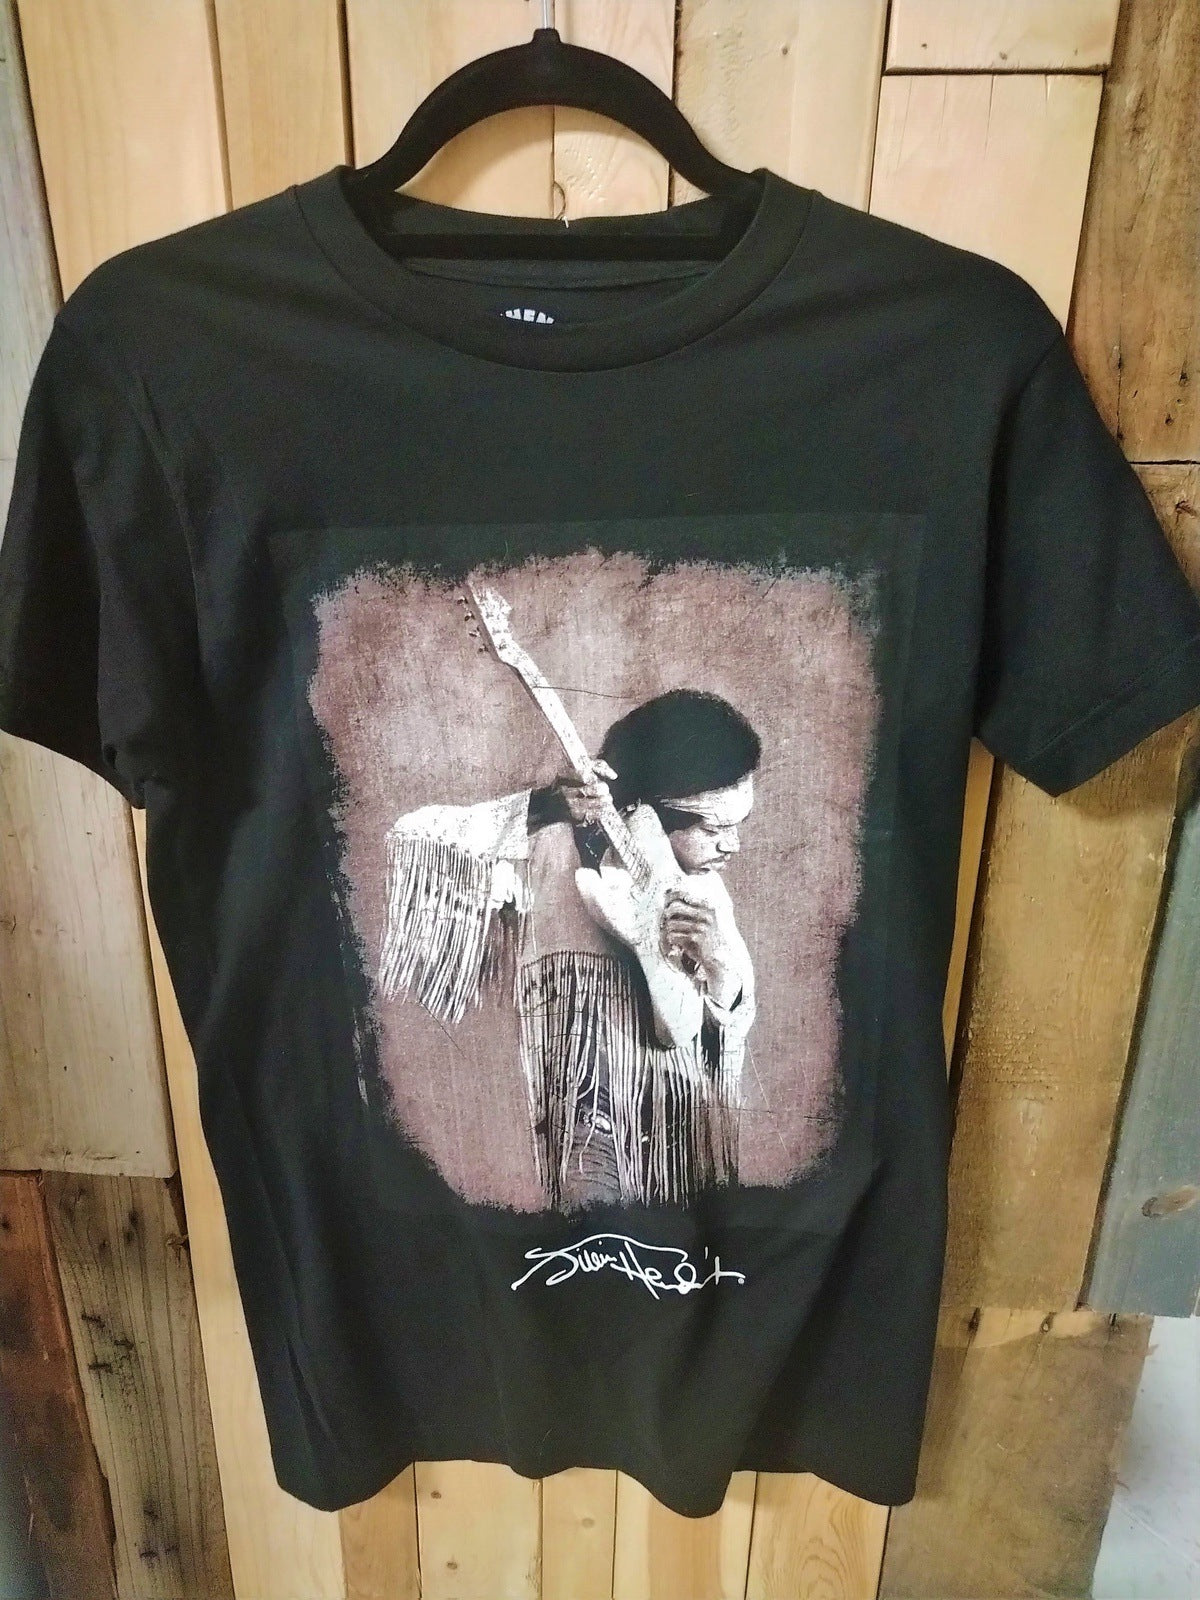 Jimi Hendrix Authentic New with Tags Tee Shirt Size Small